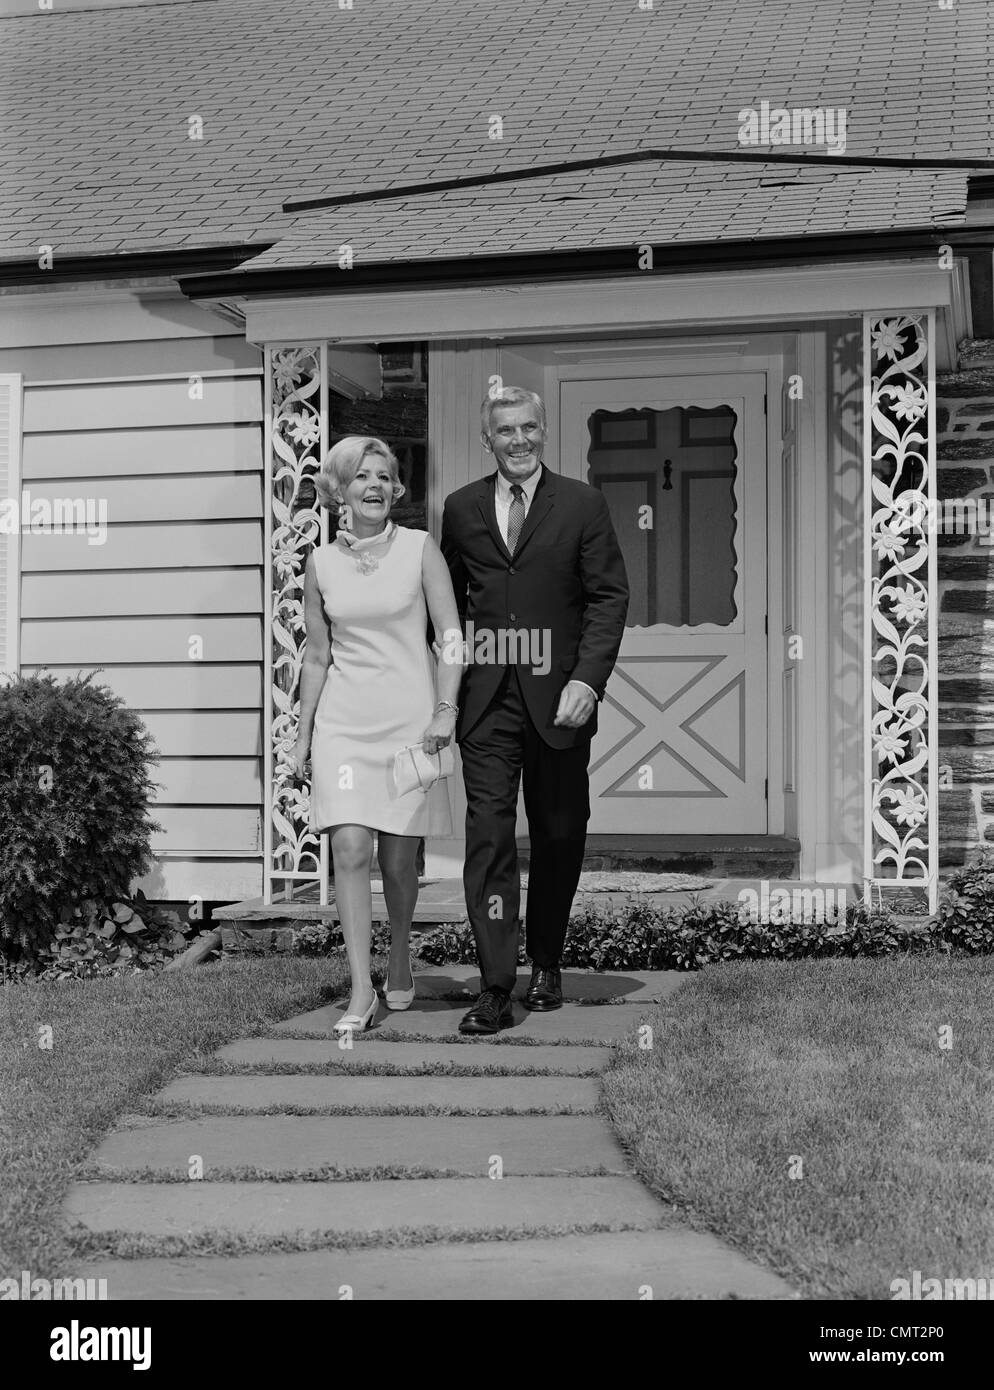 1960s MATURE COUPLE WALKING  ON SIDEWALK FRONT OF HOUSE Stock Photo